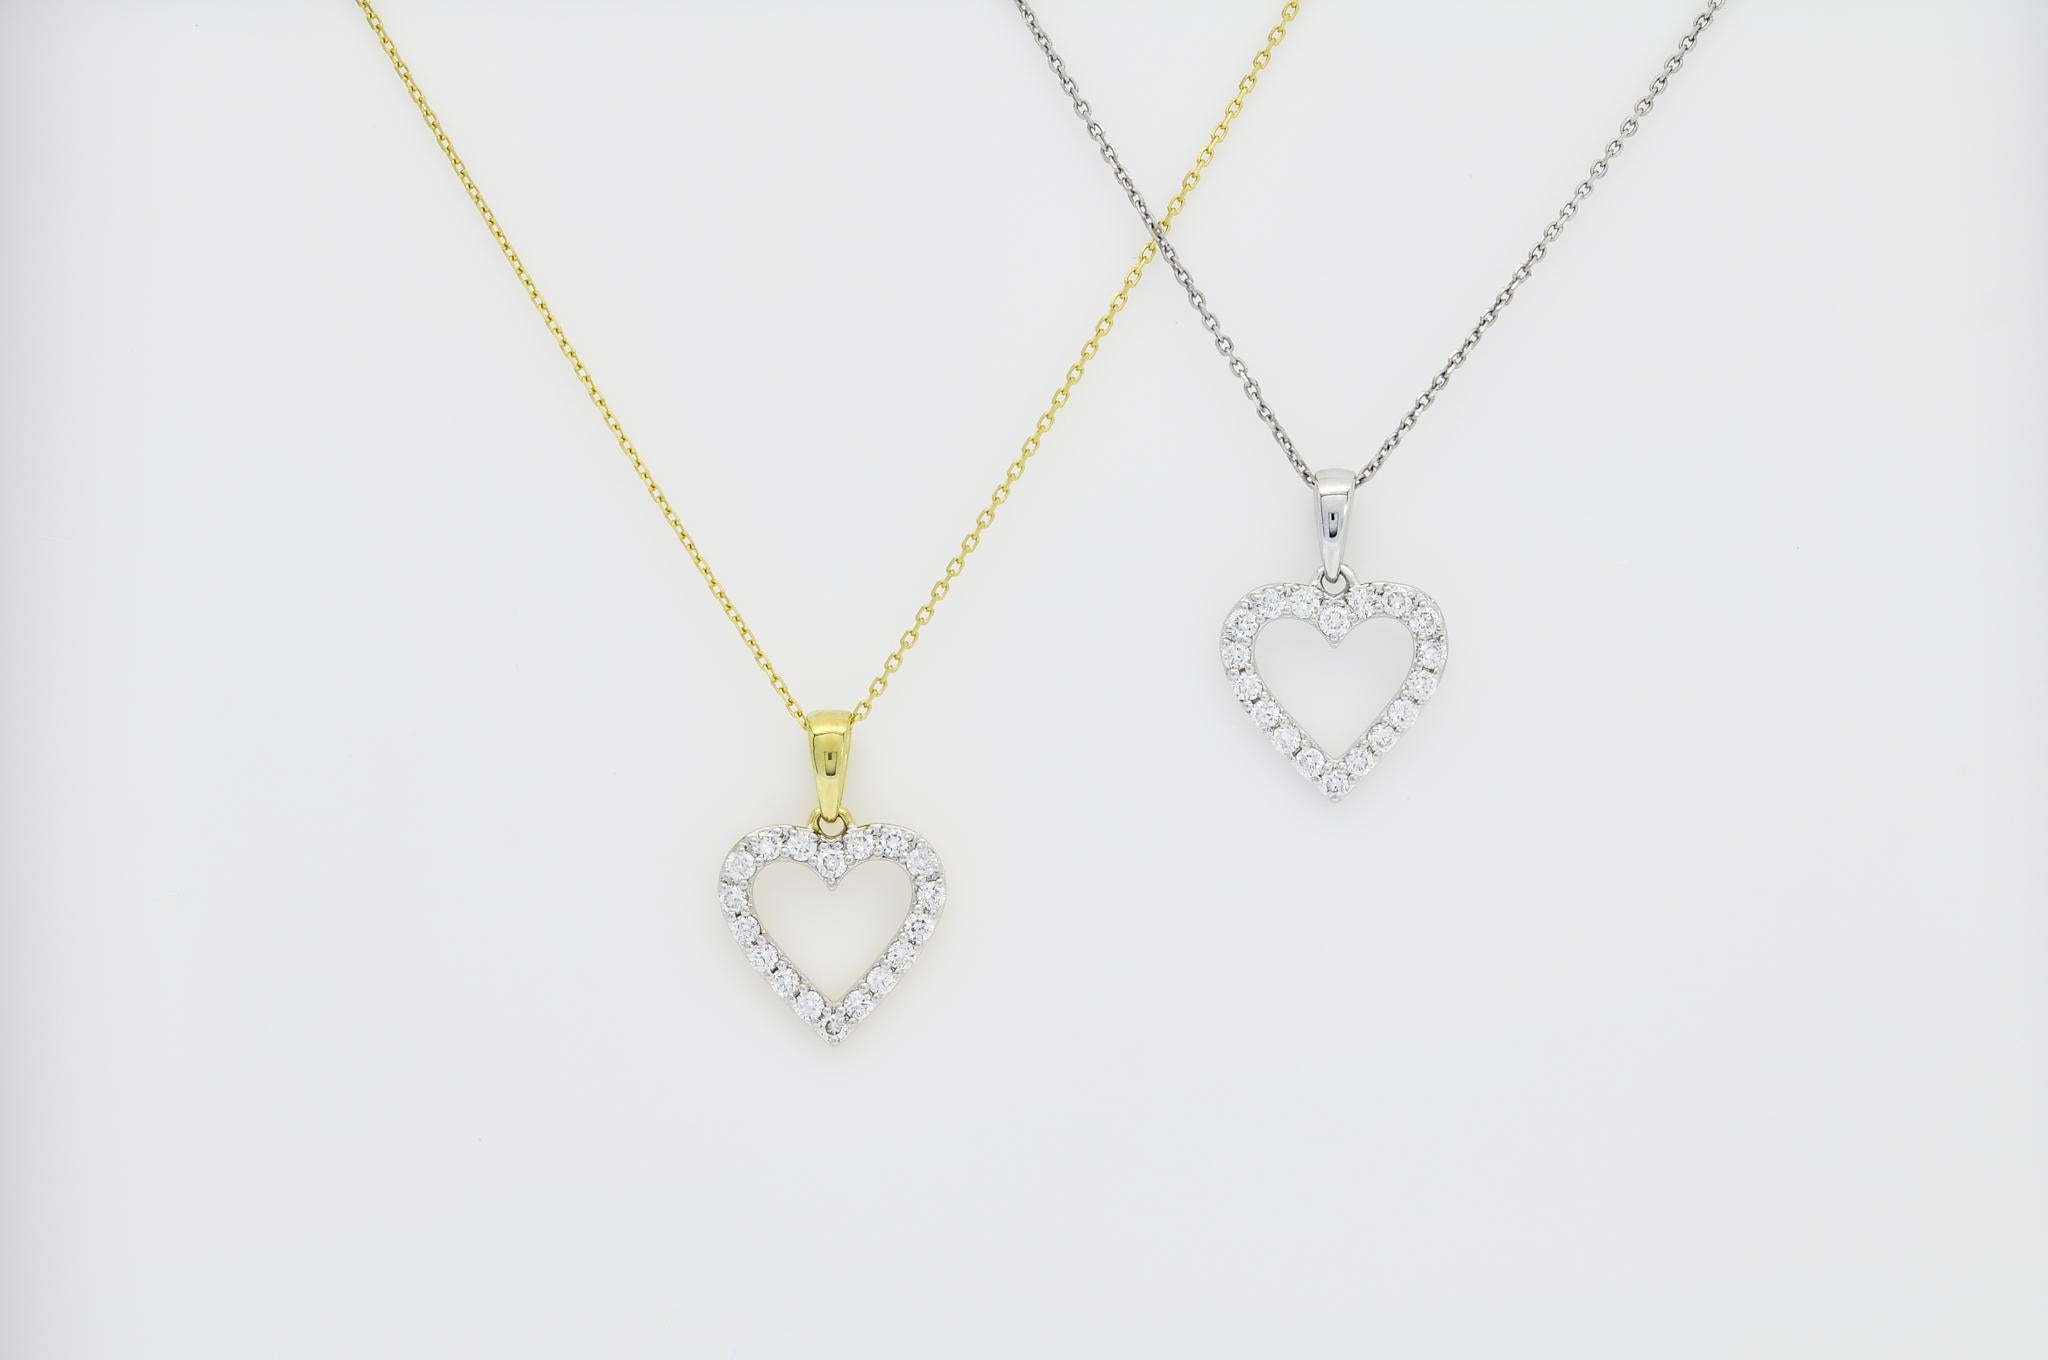 Introducing our exquisite Large Heart Shaped Pendant Necklace, a symbol of love and devotion delicately crafted to captivate hearts. This stunning necklace features a dainty heart-shaped pendant, meticulously formed from shimmering 18K Yellow gold,